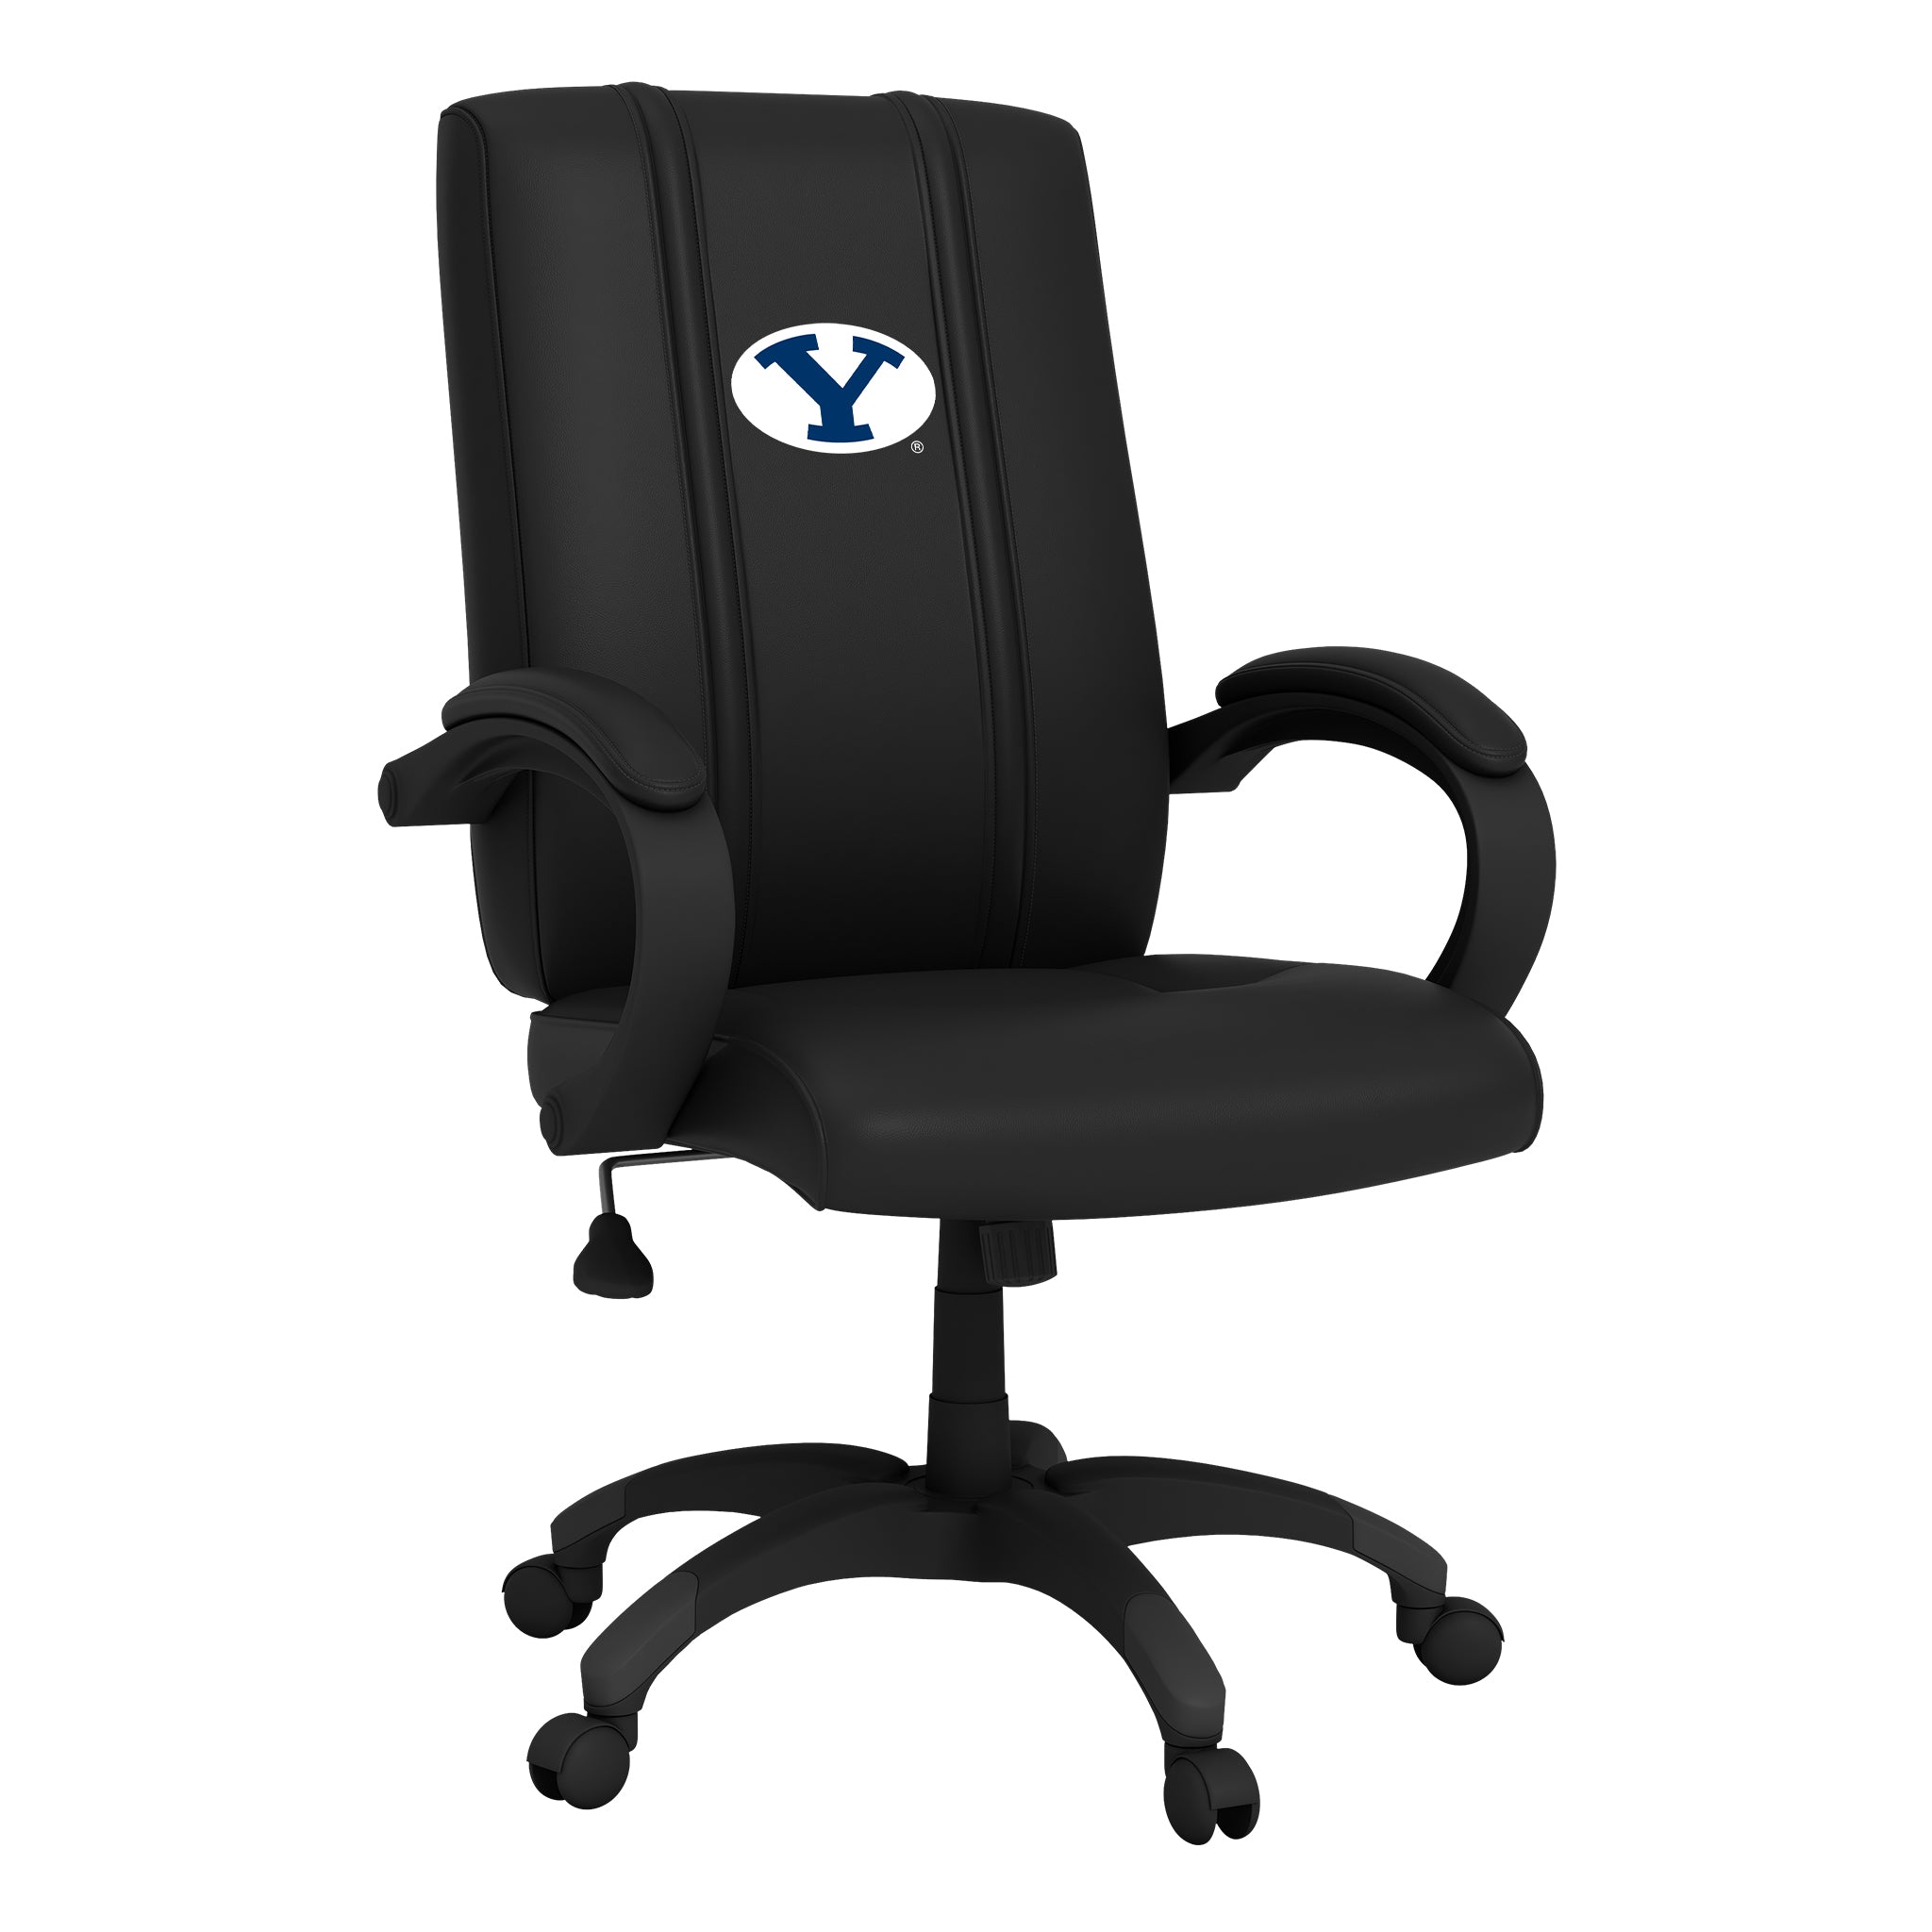 BYU Cougars Office Chair 1000 with BYU Cougars Logo